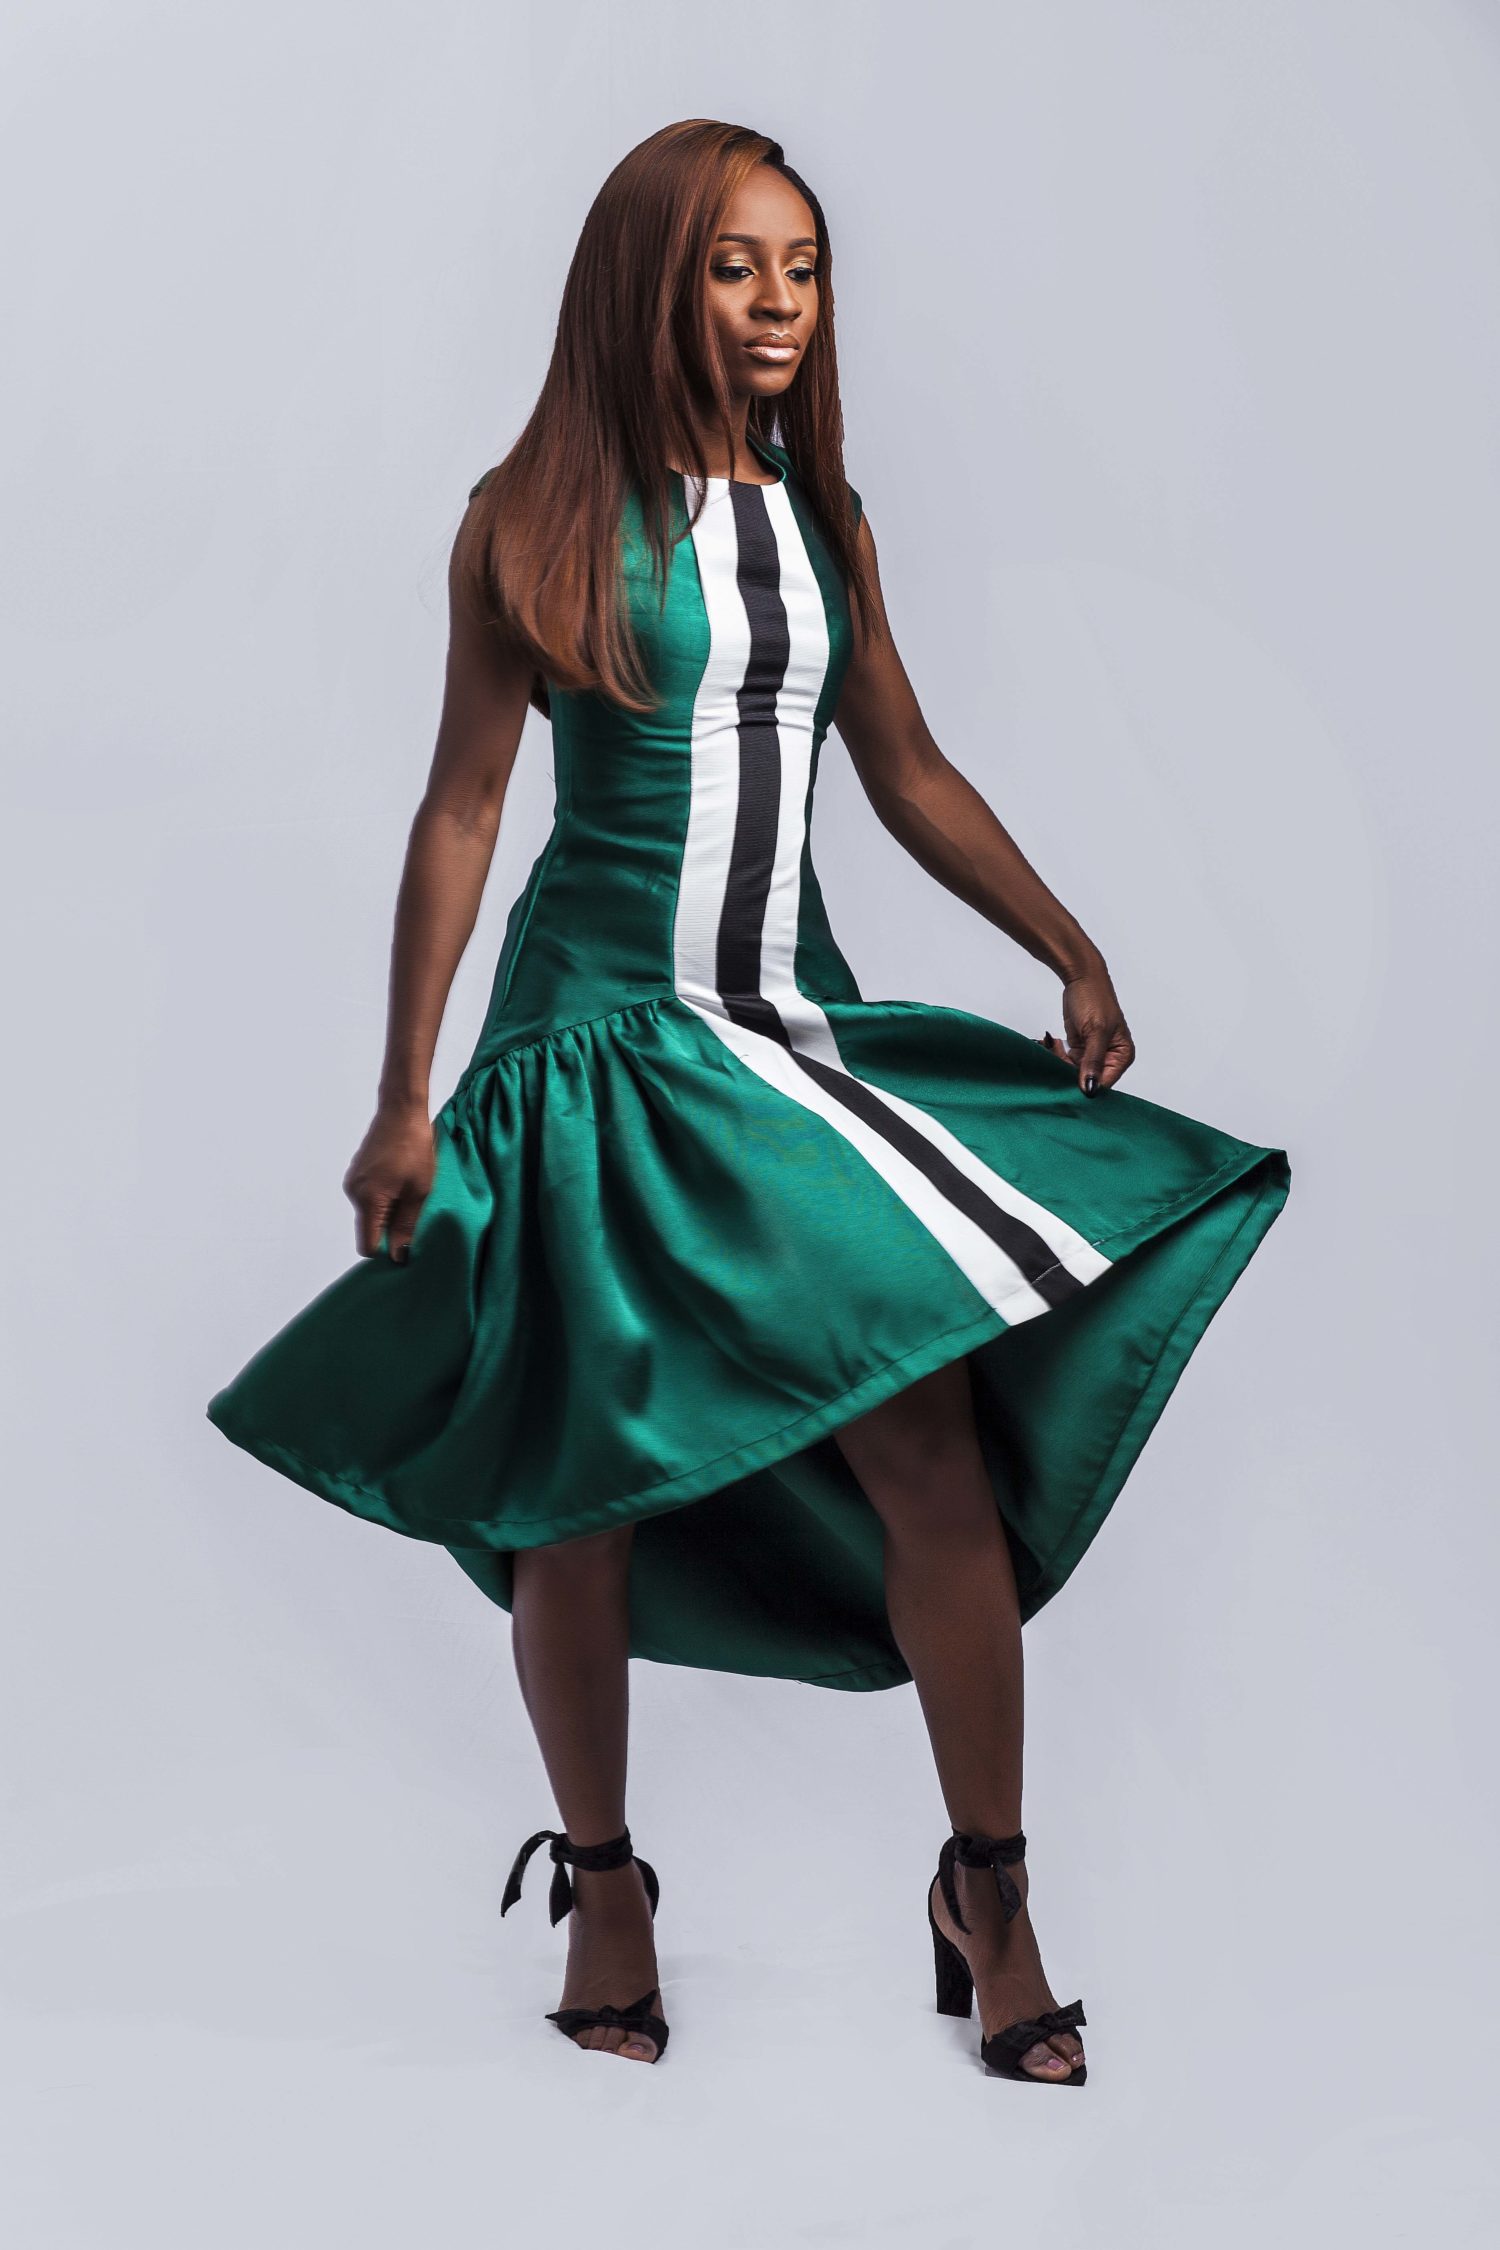 Big Brother Naija Star Anto Lecky Works It In Ayaba Woman’s New Collection